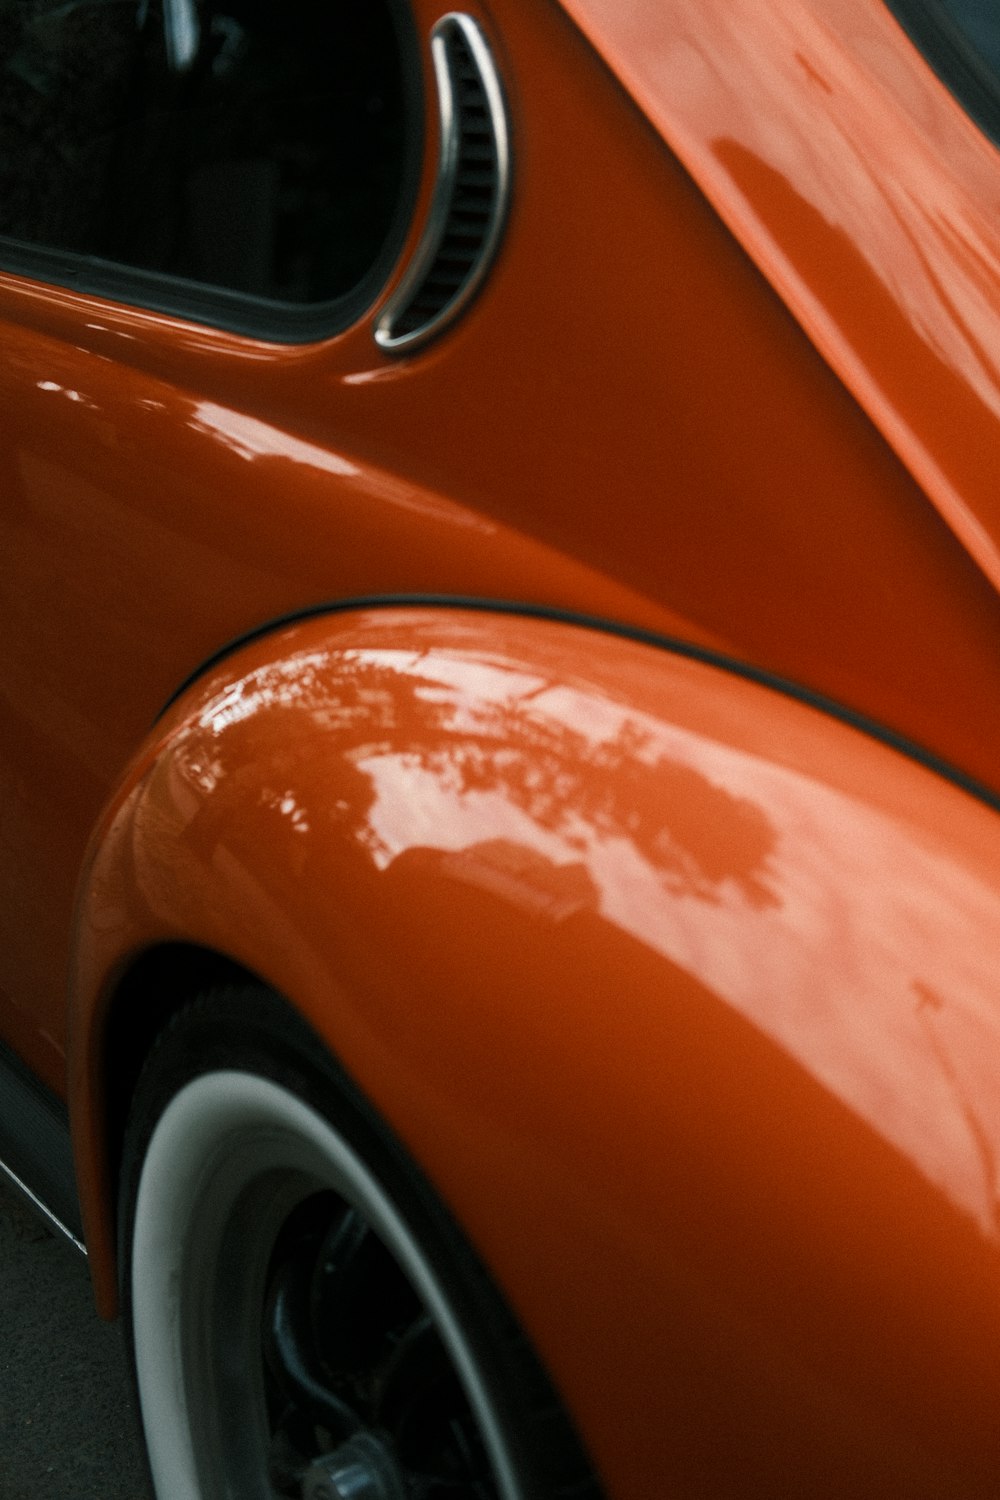 a close up of the front end of an orange car